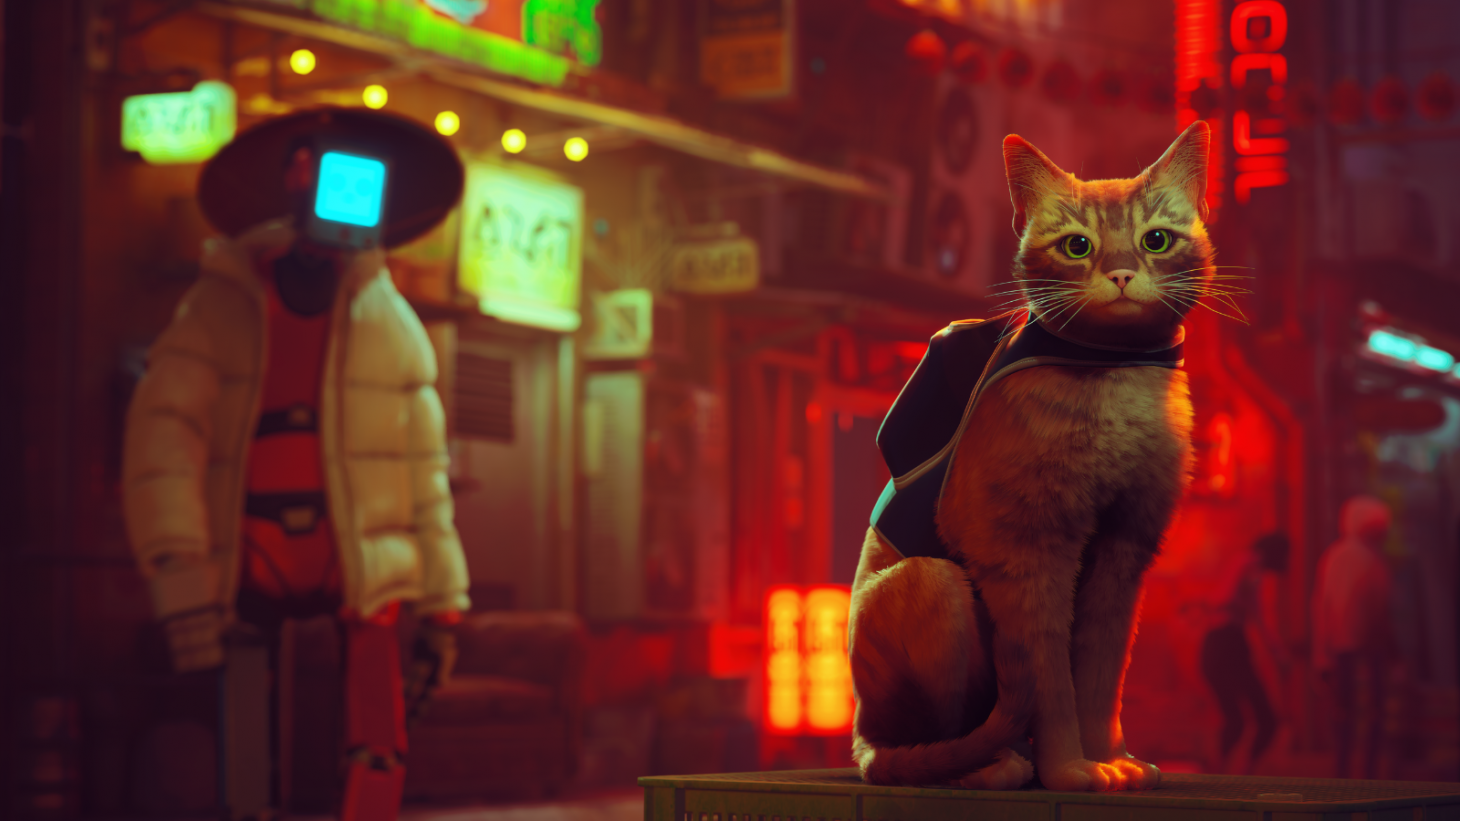 The cat from Stray looks at the camera with a robot behind it.